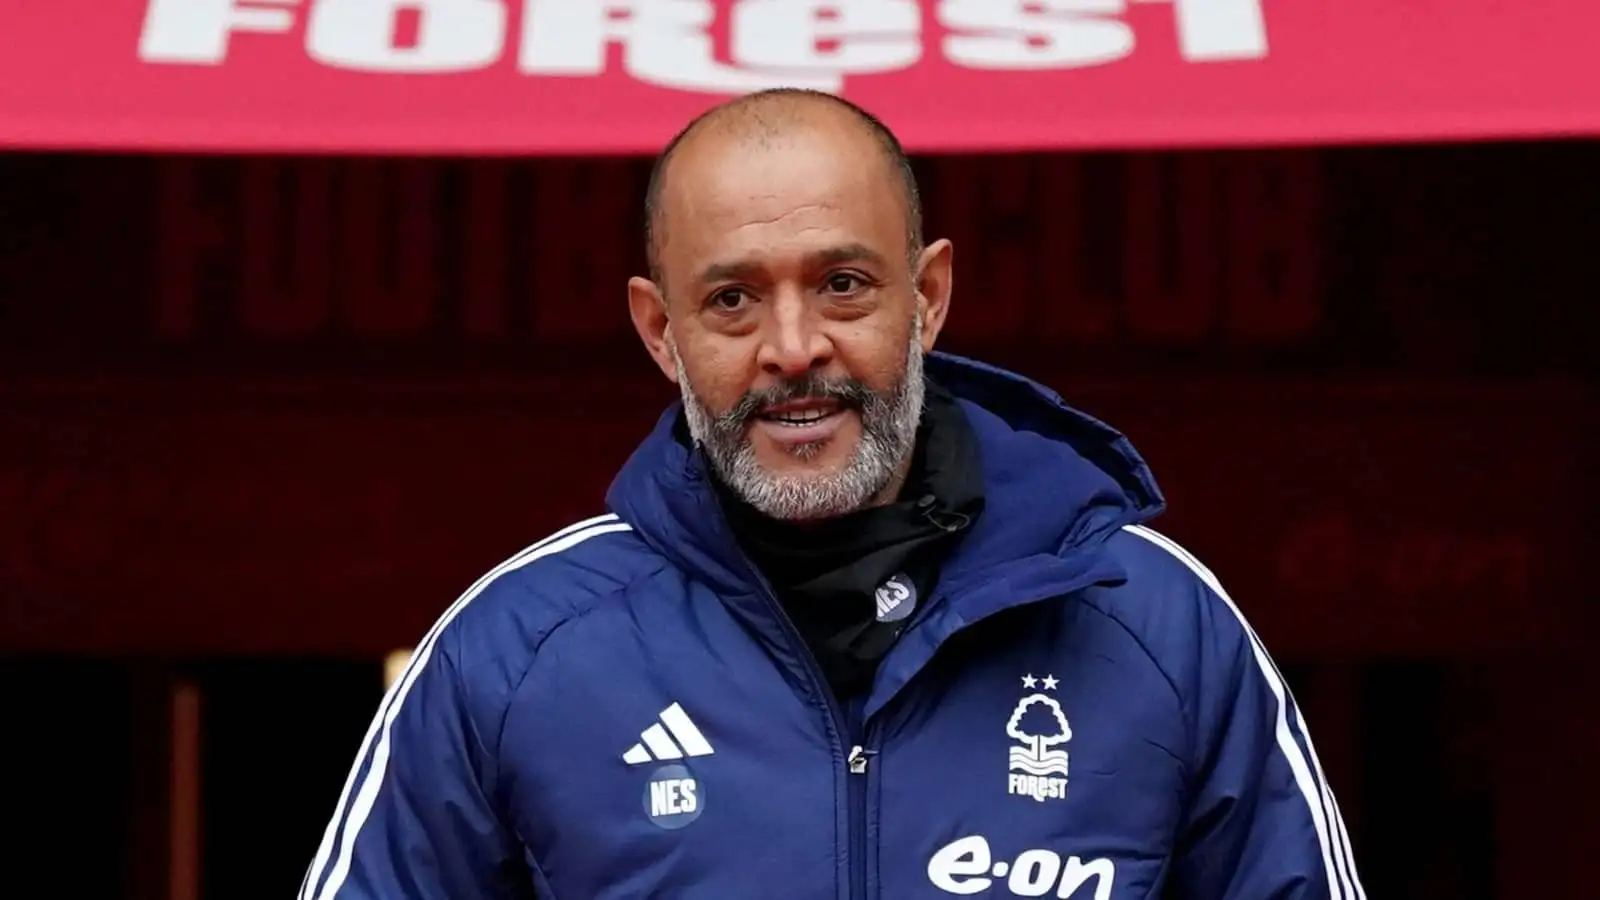 This worries me' - Two major Nuno Espirito Santo concerns emerge as former  Nott'm Forest star analyses appointment